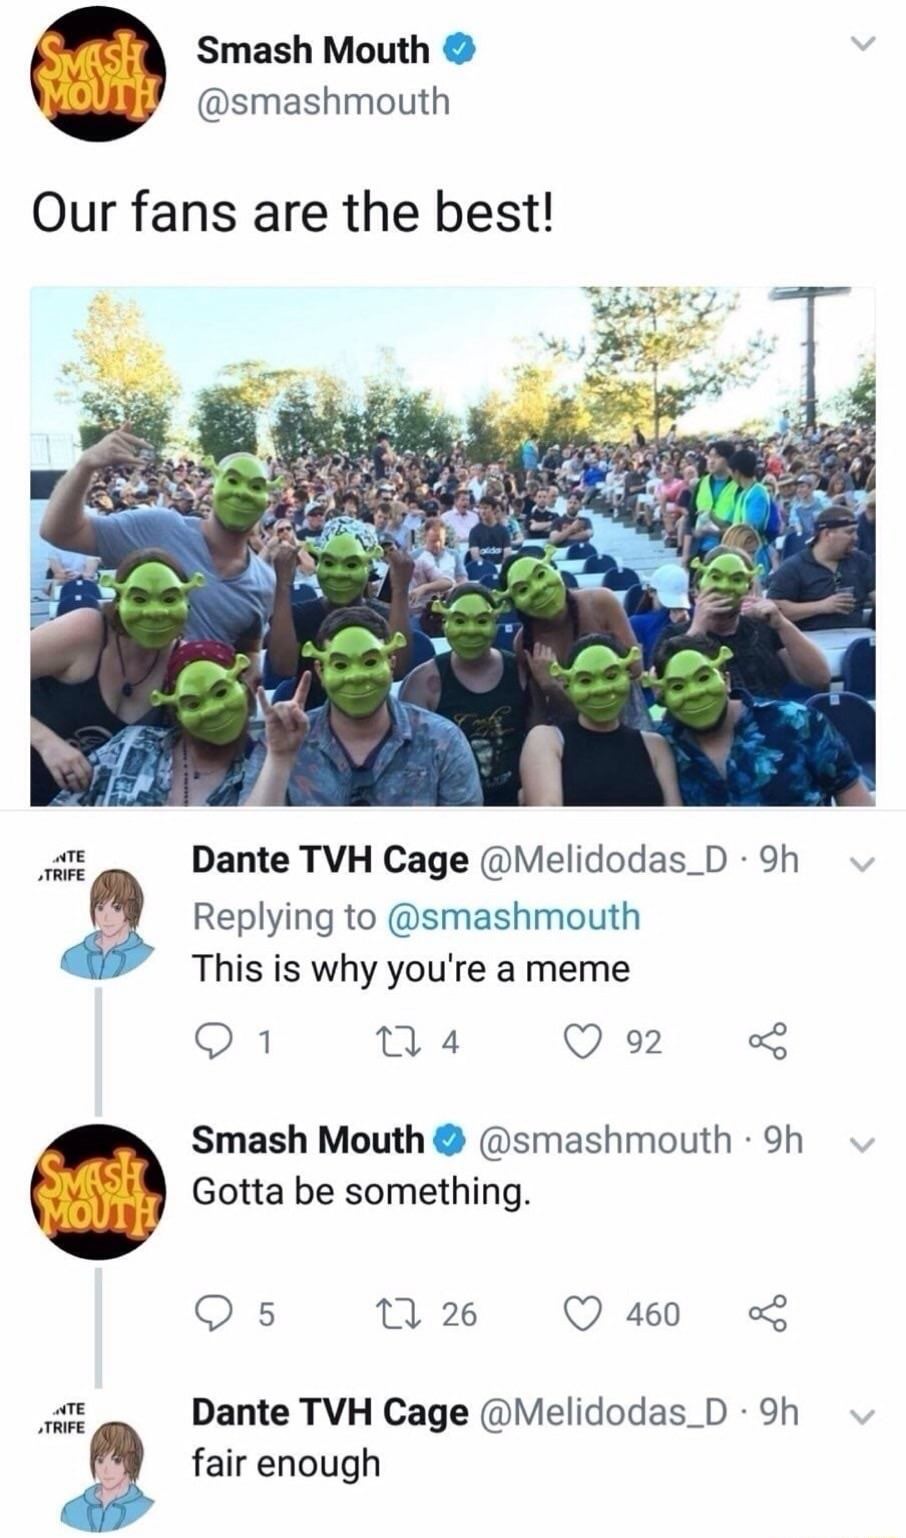 smash mouth shrek meme - Smash Mouth Our fans are the best! Nte Trife Dante Tvh Cage . 9h This is why you're a meme 9 1 224 92 Smash Mouth 9h Gotta be something. v 9 5 22 26 460 Nte Trife Dante Tvh Cage . 9h fair enough